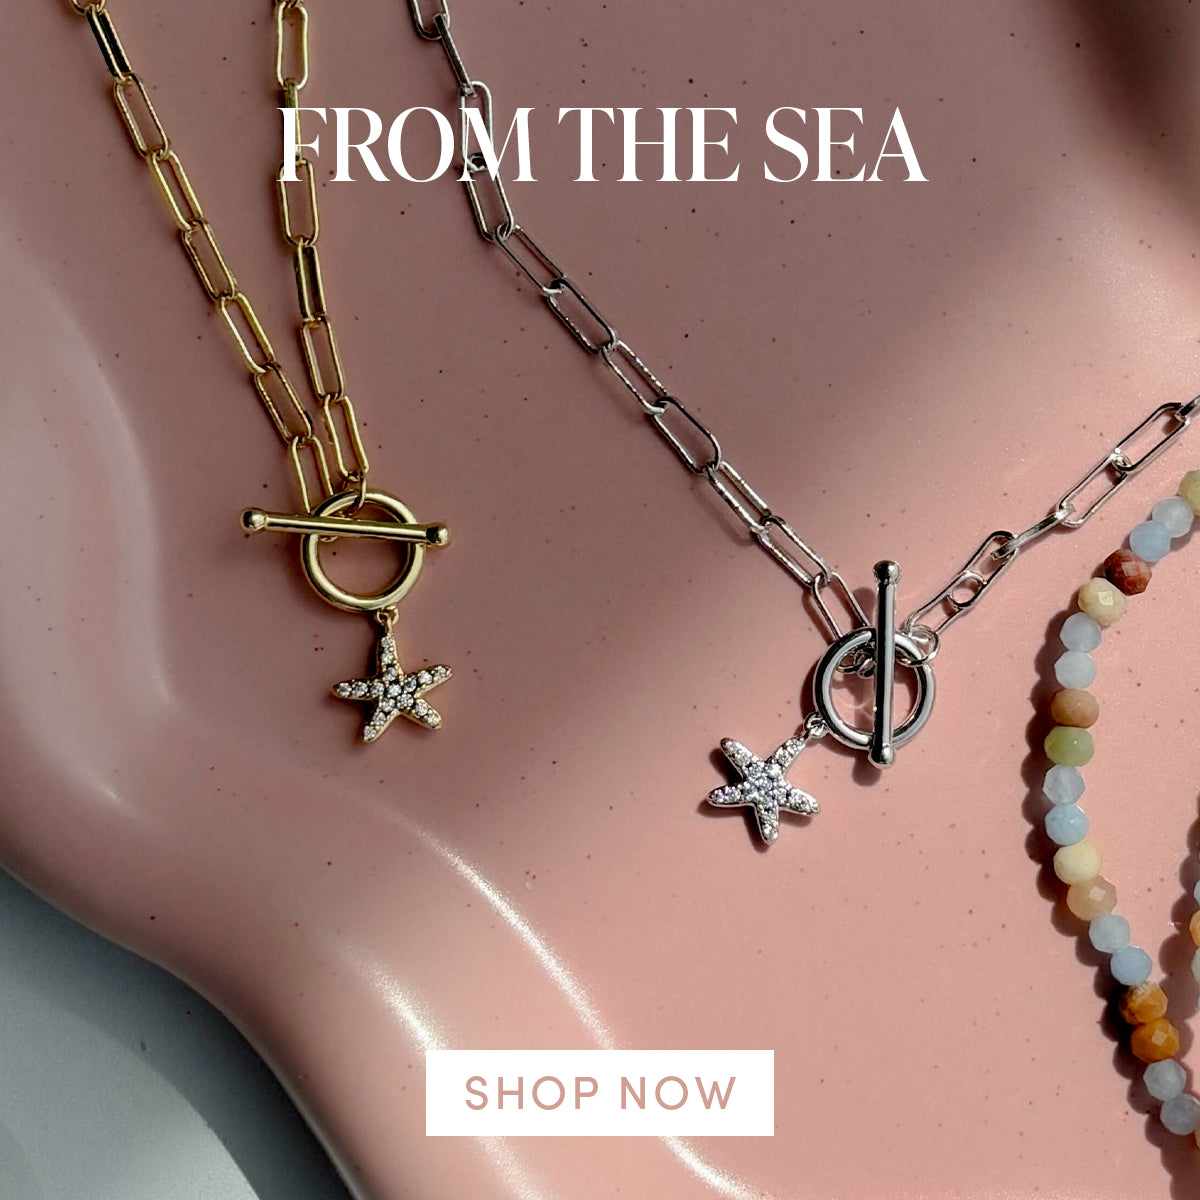 From the Sea | Shop Now | Uncommon James